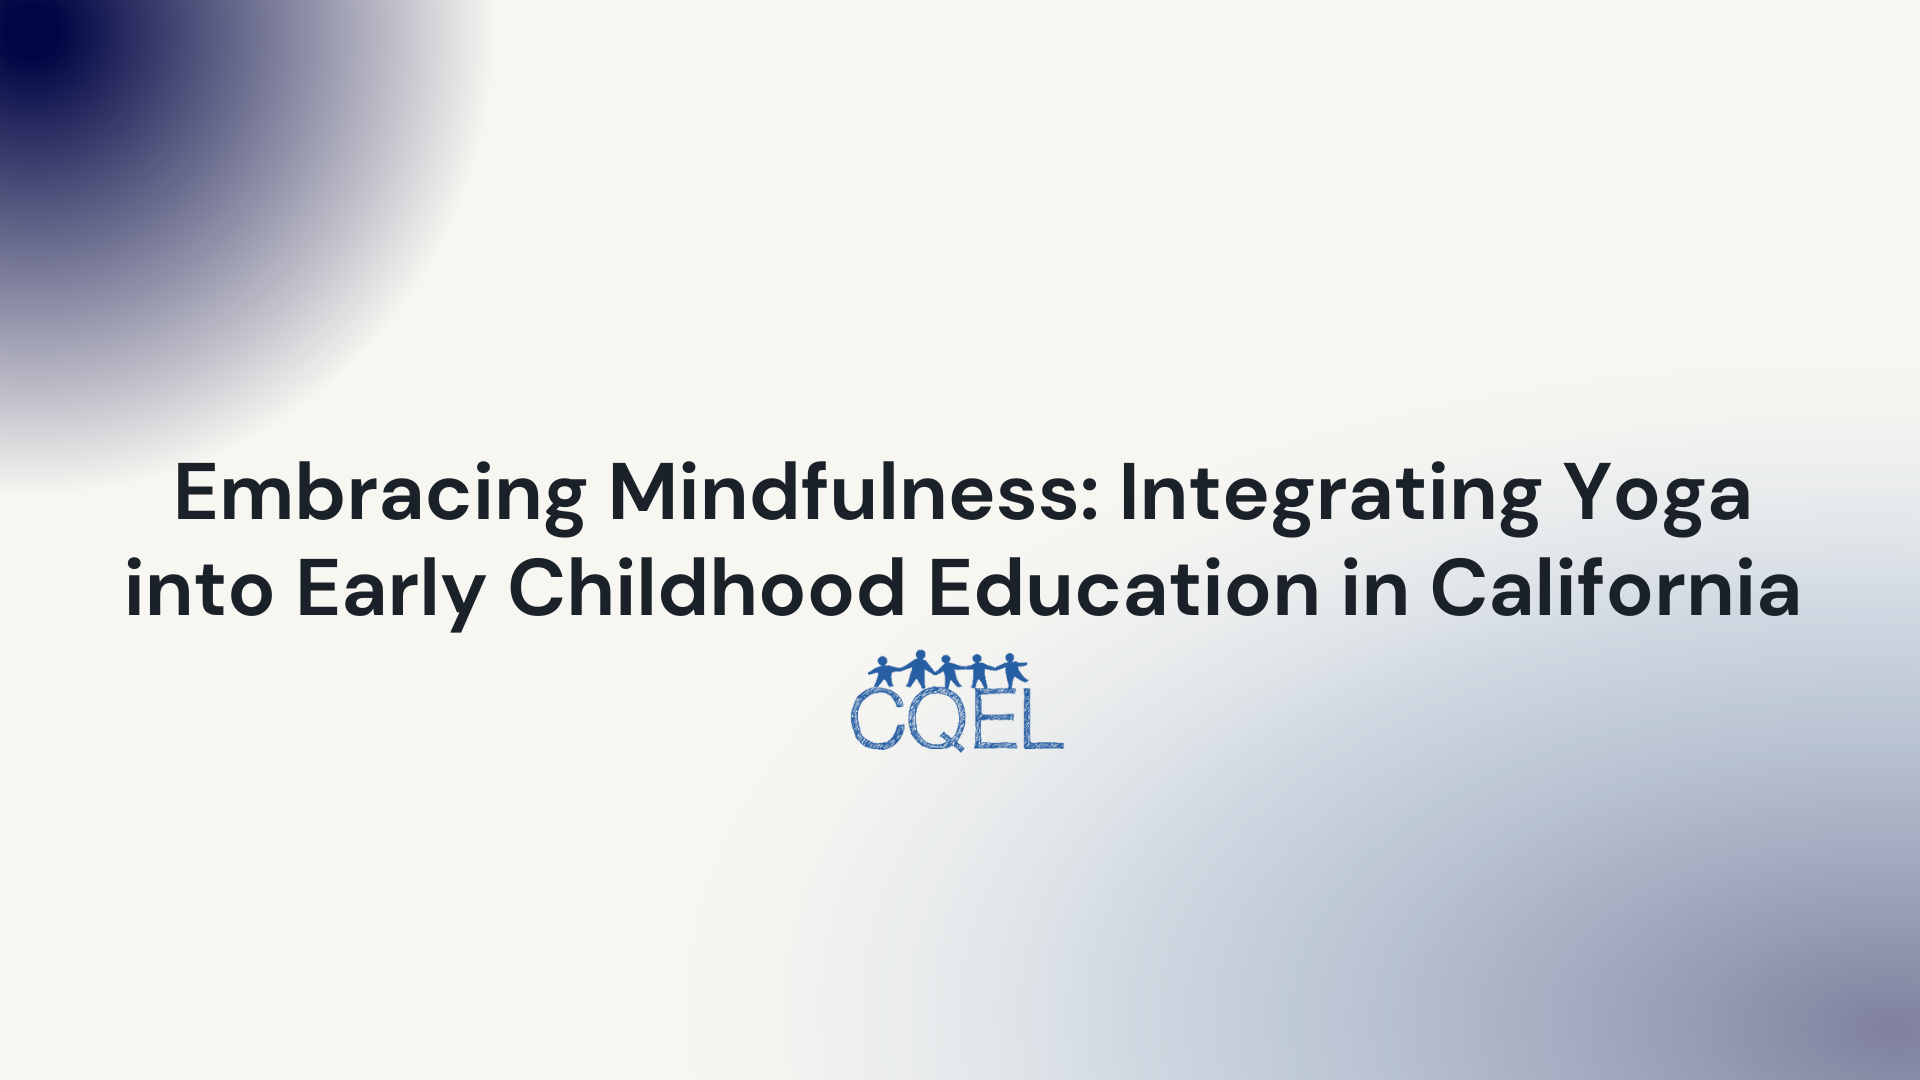 Embracing Mindfulness: Integrating Yoga into Early Childhood Education in California